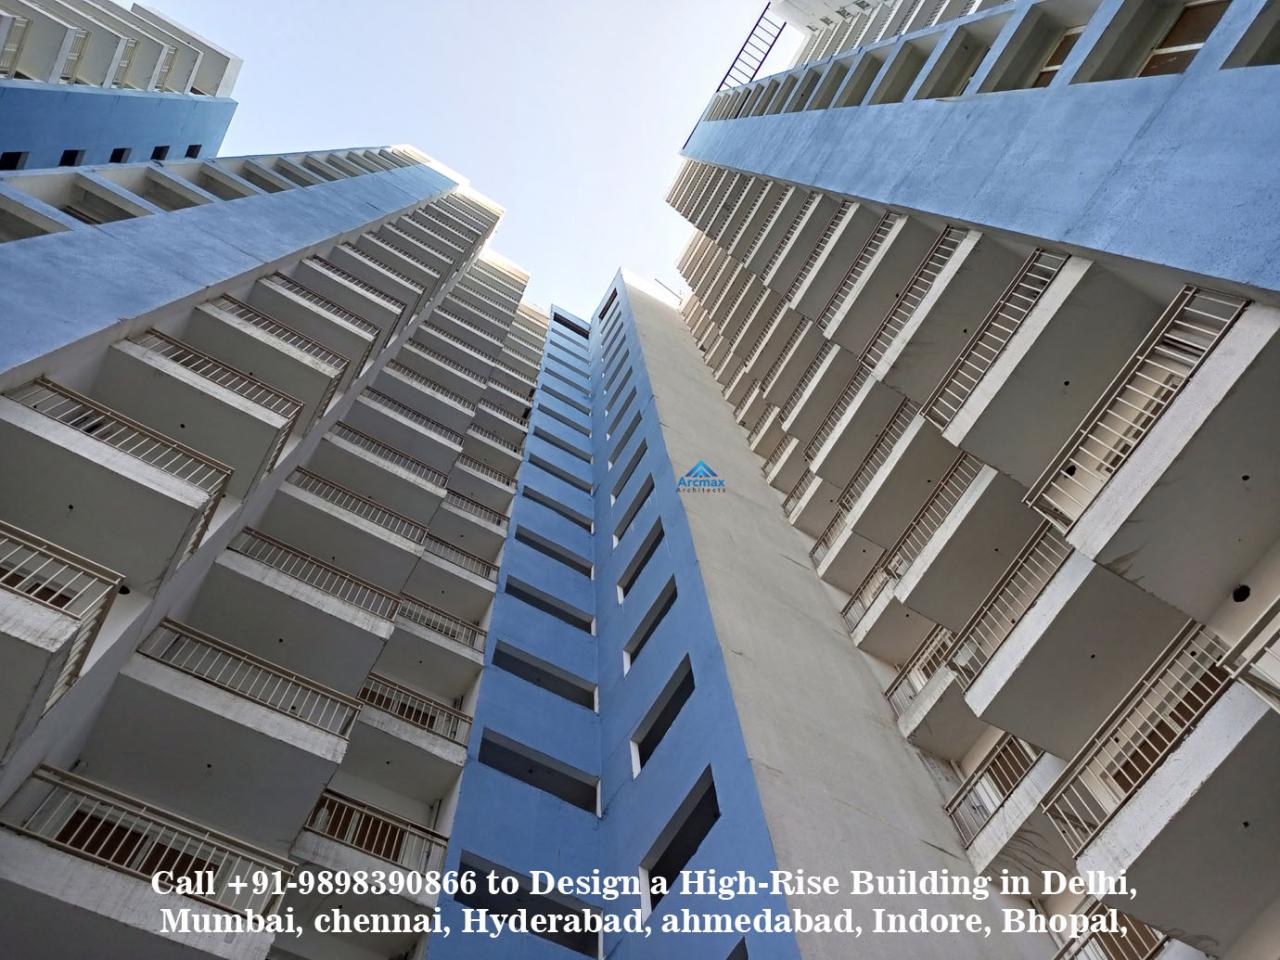 Best Architects to Design a High-Rise Building-Best Practices for Safety and Stability